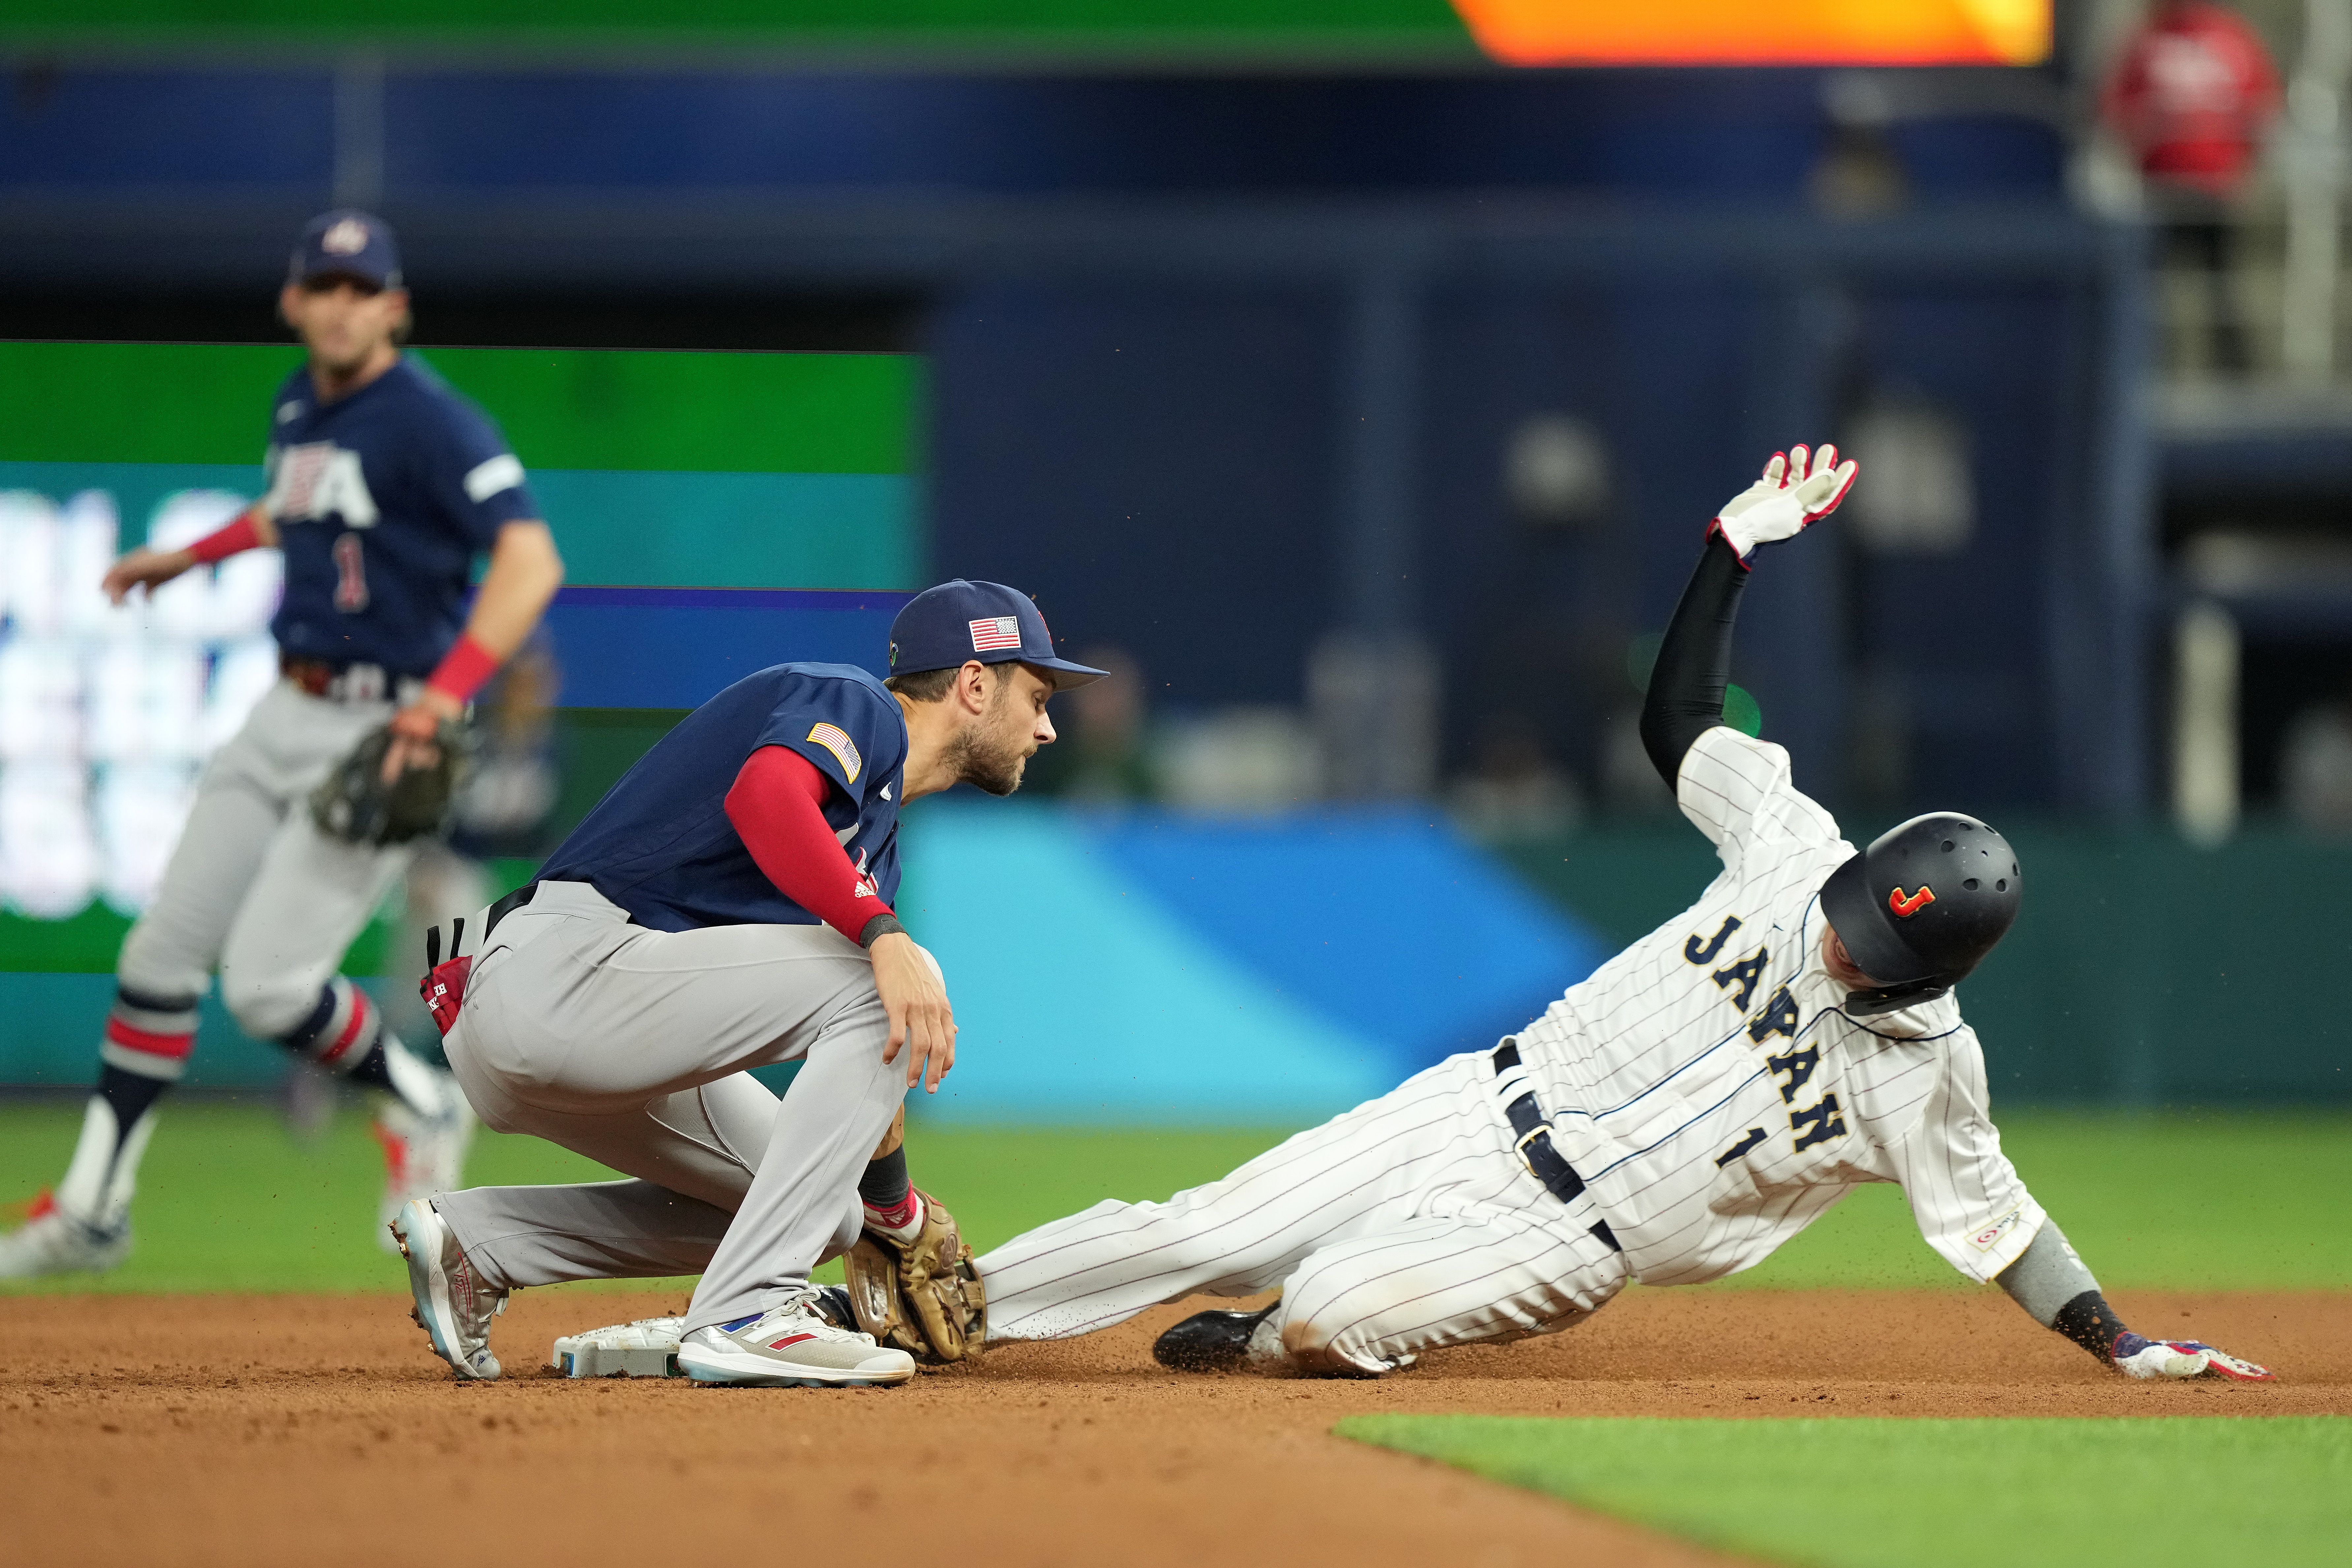 Tetsuto Yamada #1 of Team Japan steals second bae as Trea Turner #8 of Team USA attempts to make the tag in the eighth inning during the World Baseball Classic Championship on March 21, 2023 in Miami.